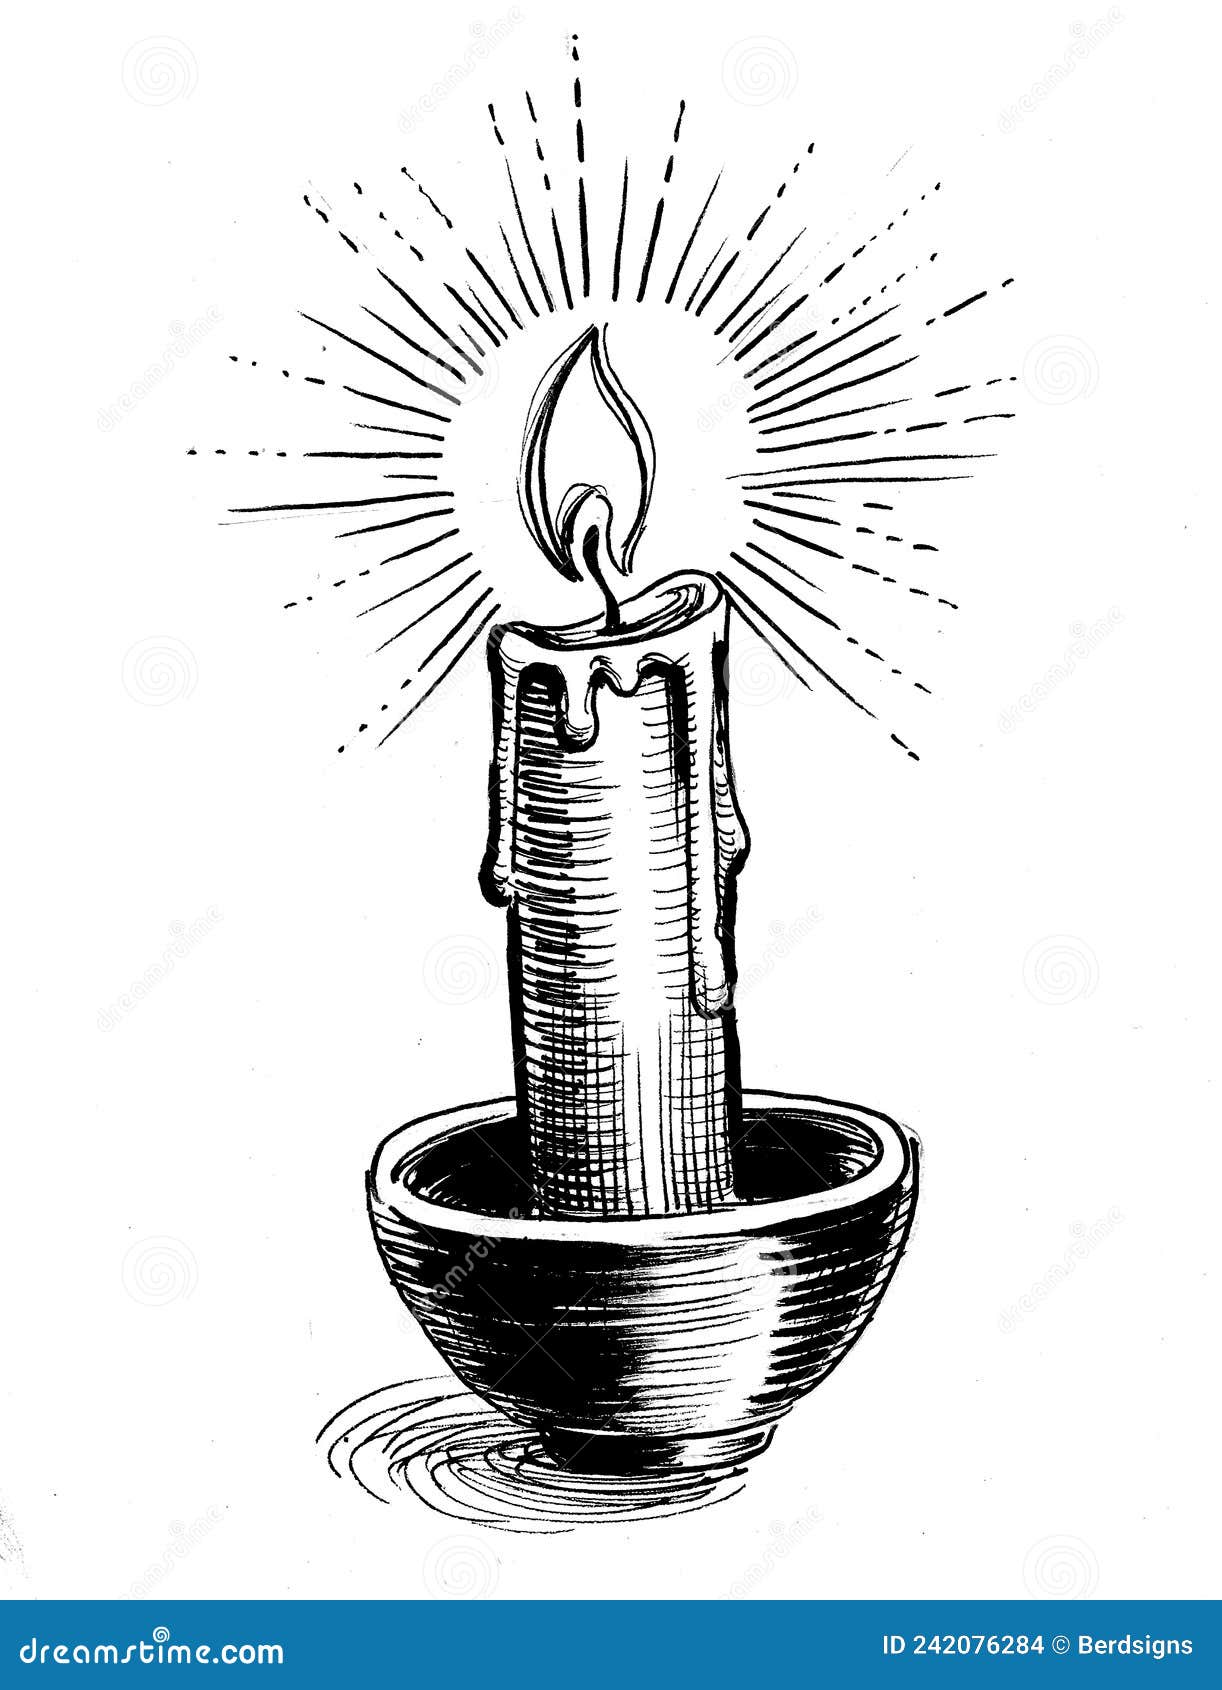 Candle Sketch by RedRoseBudBlooming on DeviantArt